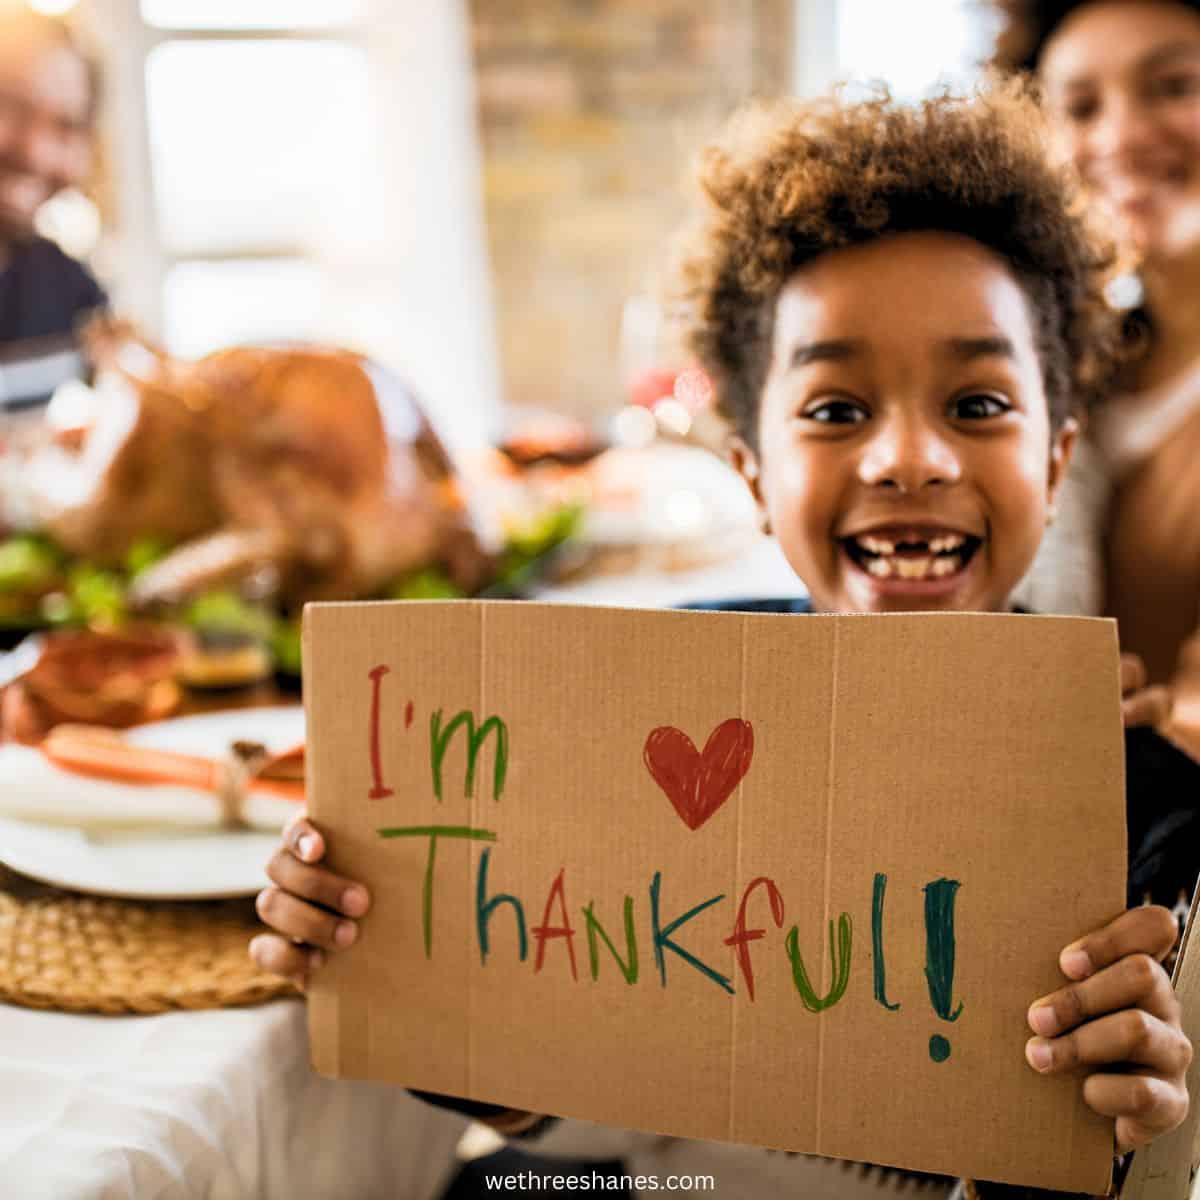 I am Thankful Free Printables for Kids this Thanksgiving